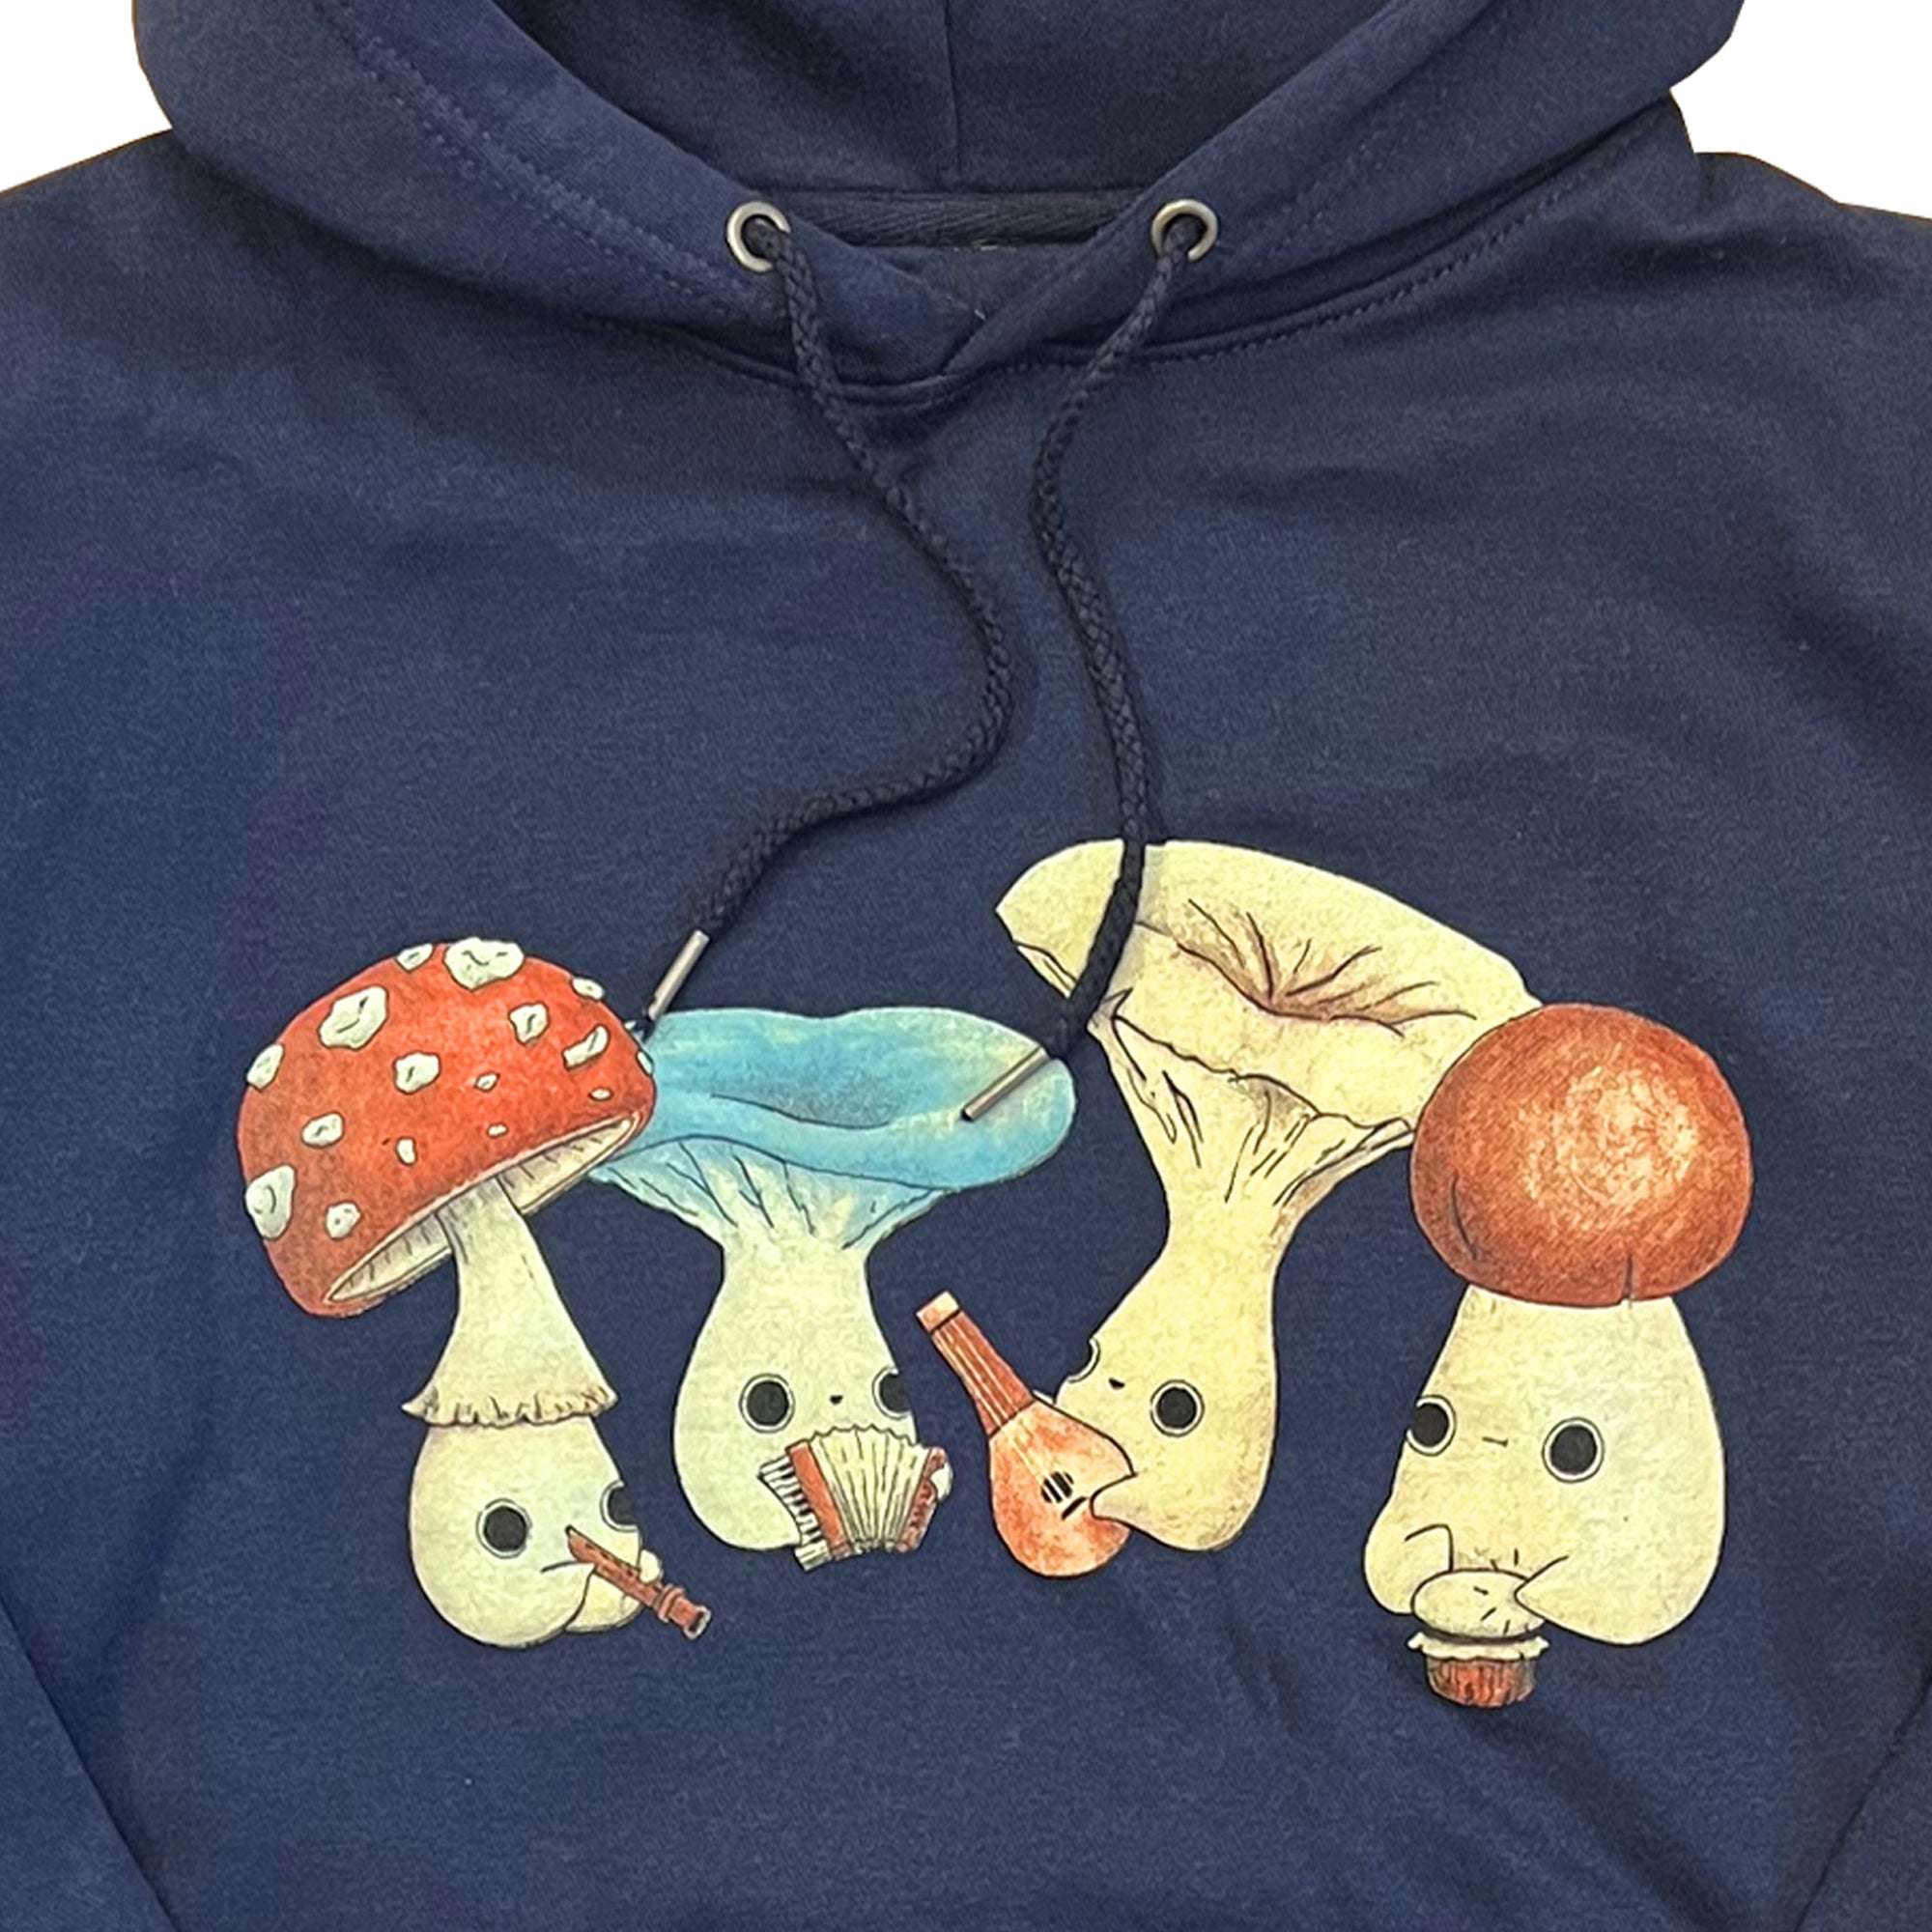 Altru The Fungus Mushlings graphic on front chest playing music on green tee by artist Abi Toads. Navy hoodie front photo